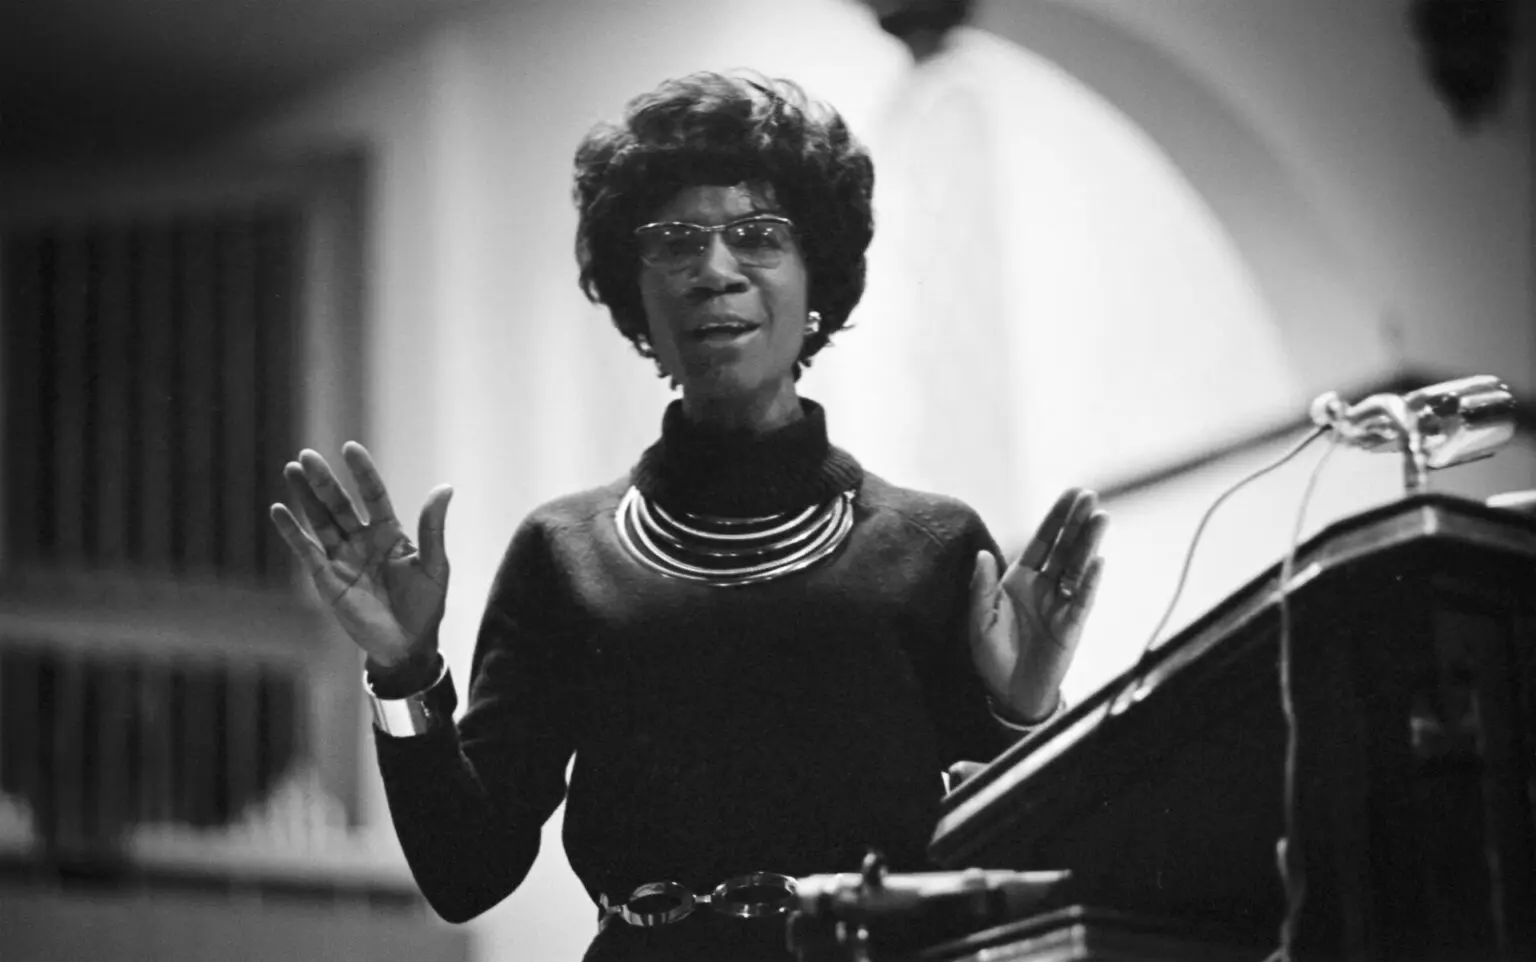 shirley Chisholm Nashville 1969 Photography is my heart john simmons dot red